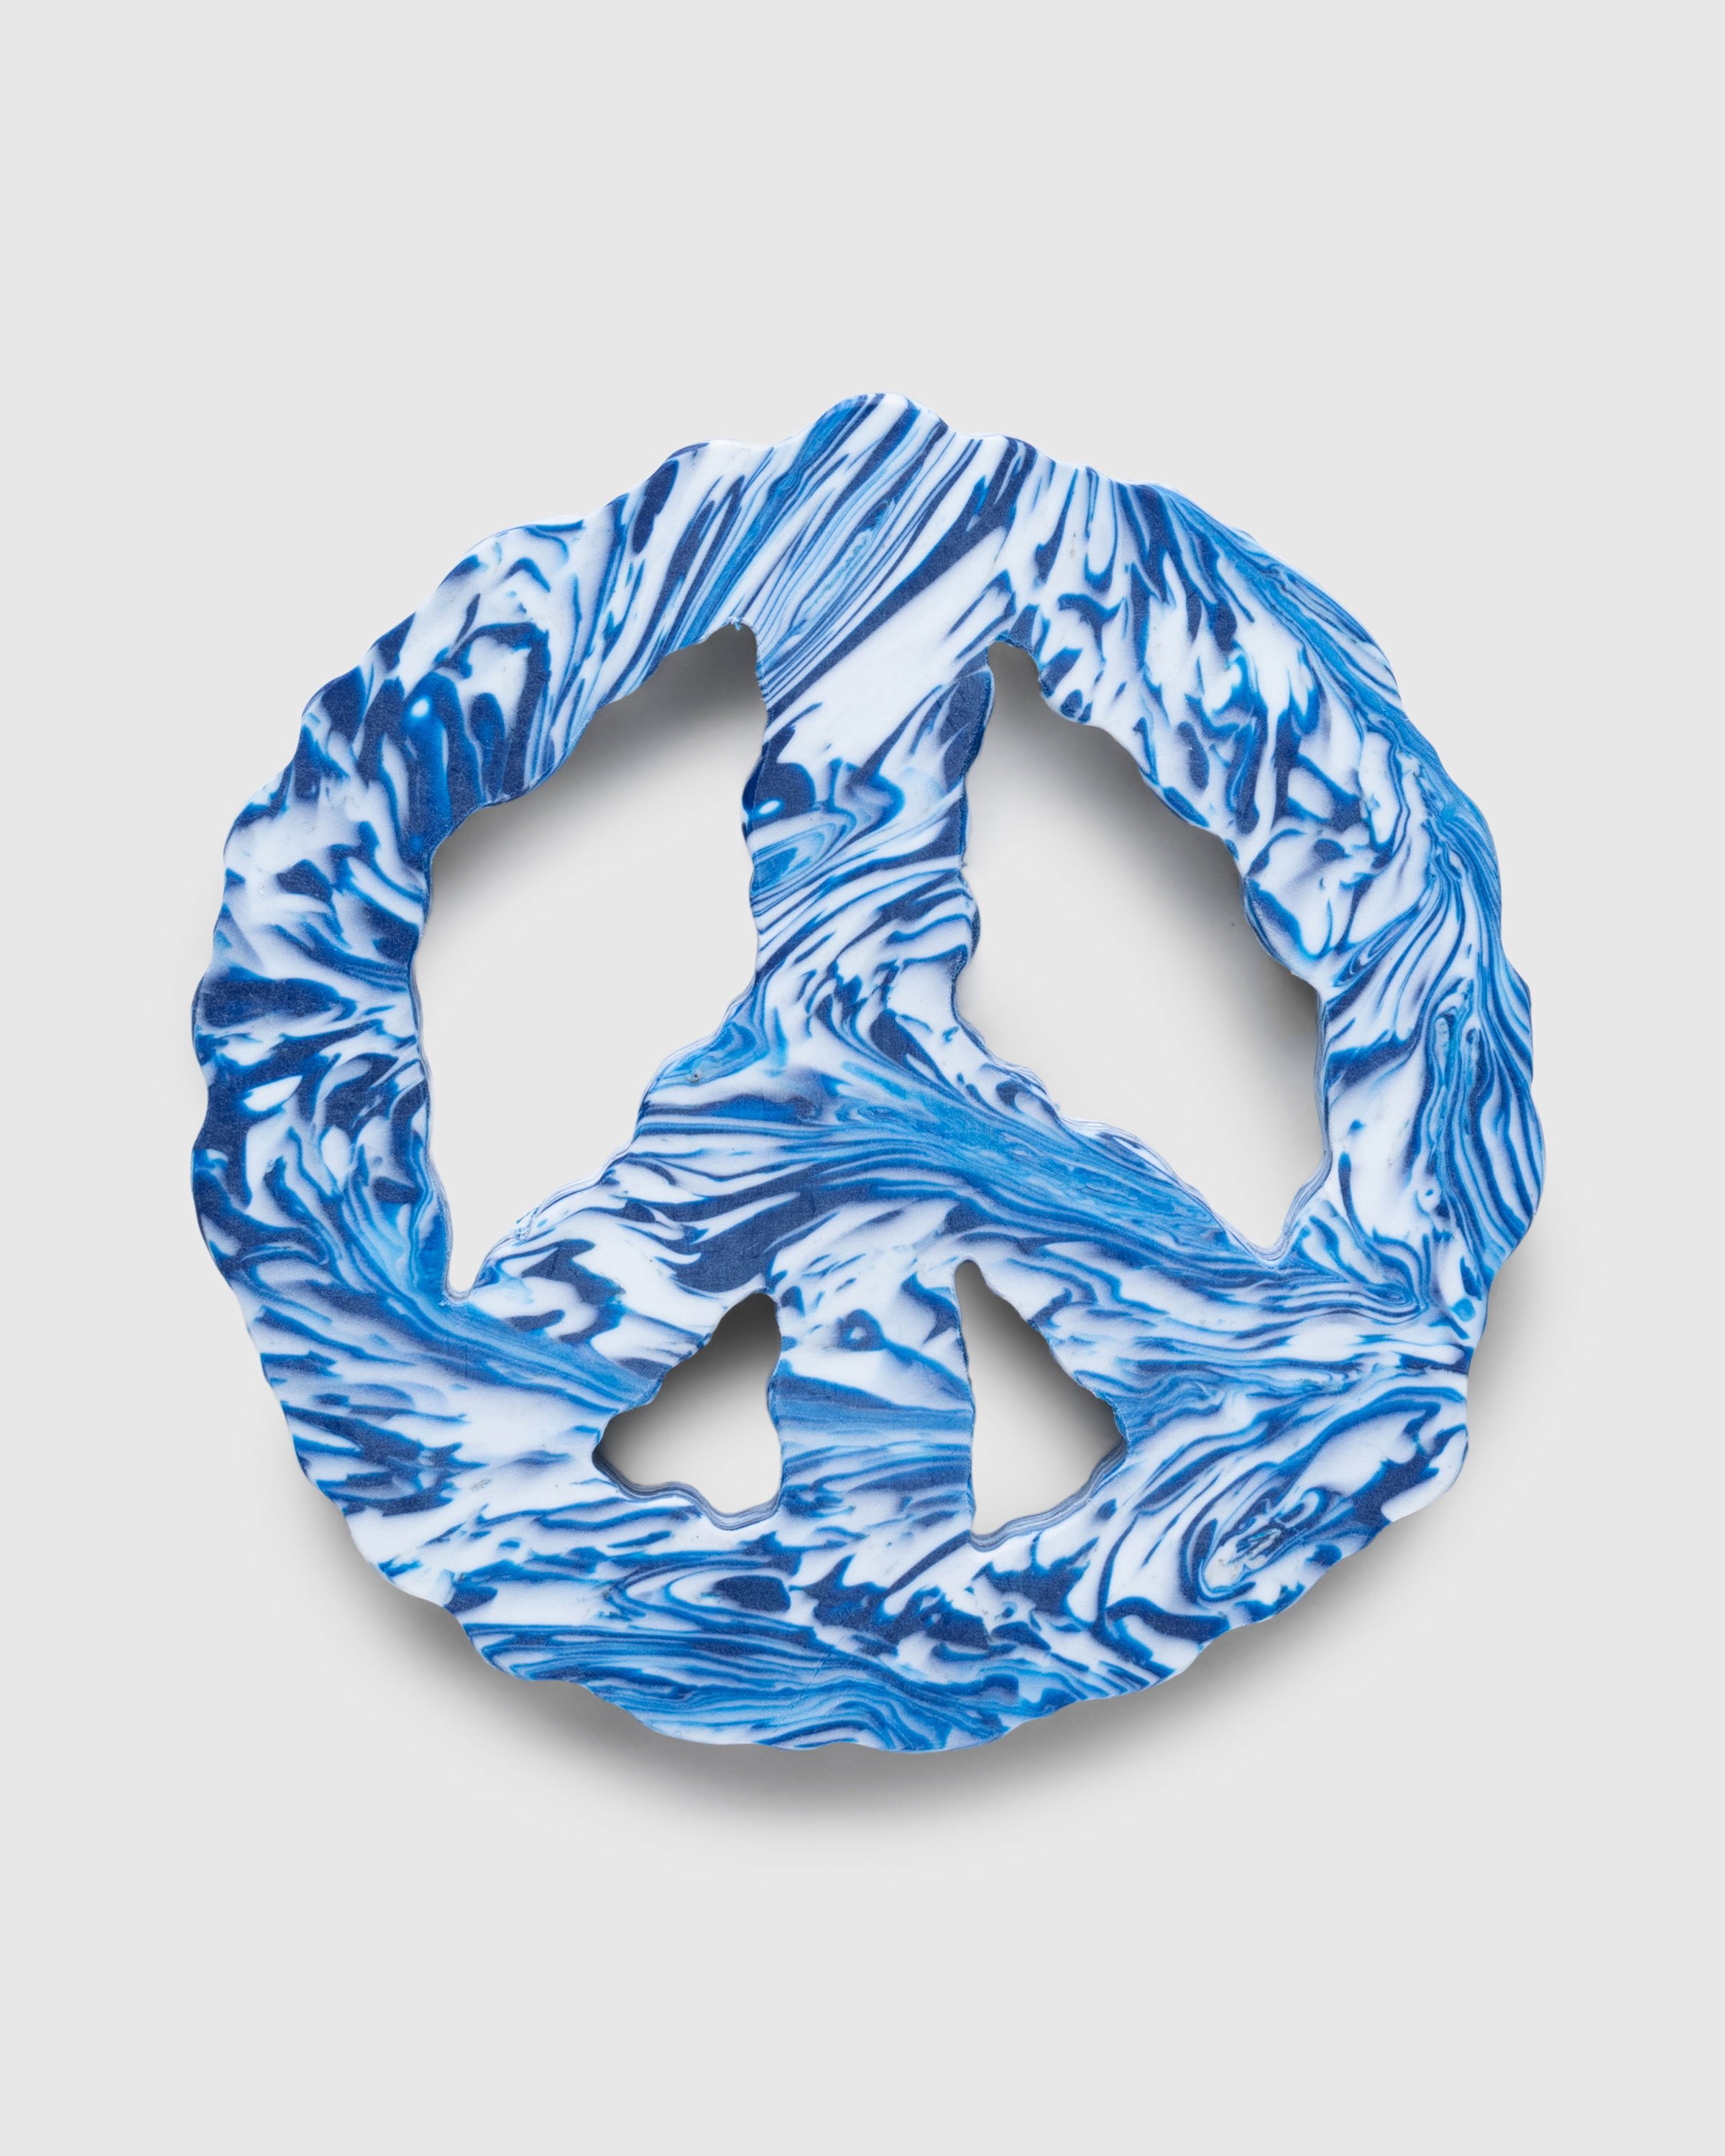 Space Available Studio - Clouded Peace Coaster Set of 4 Blue - Lifestyle - Blue - Image 1